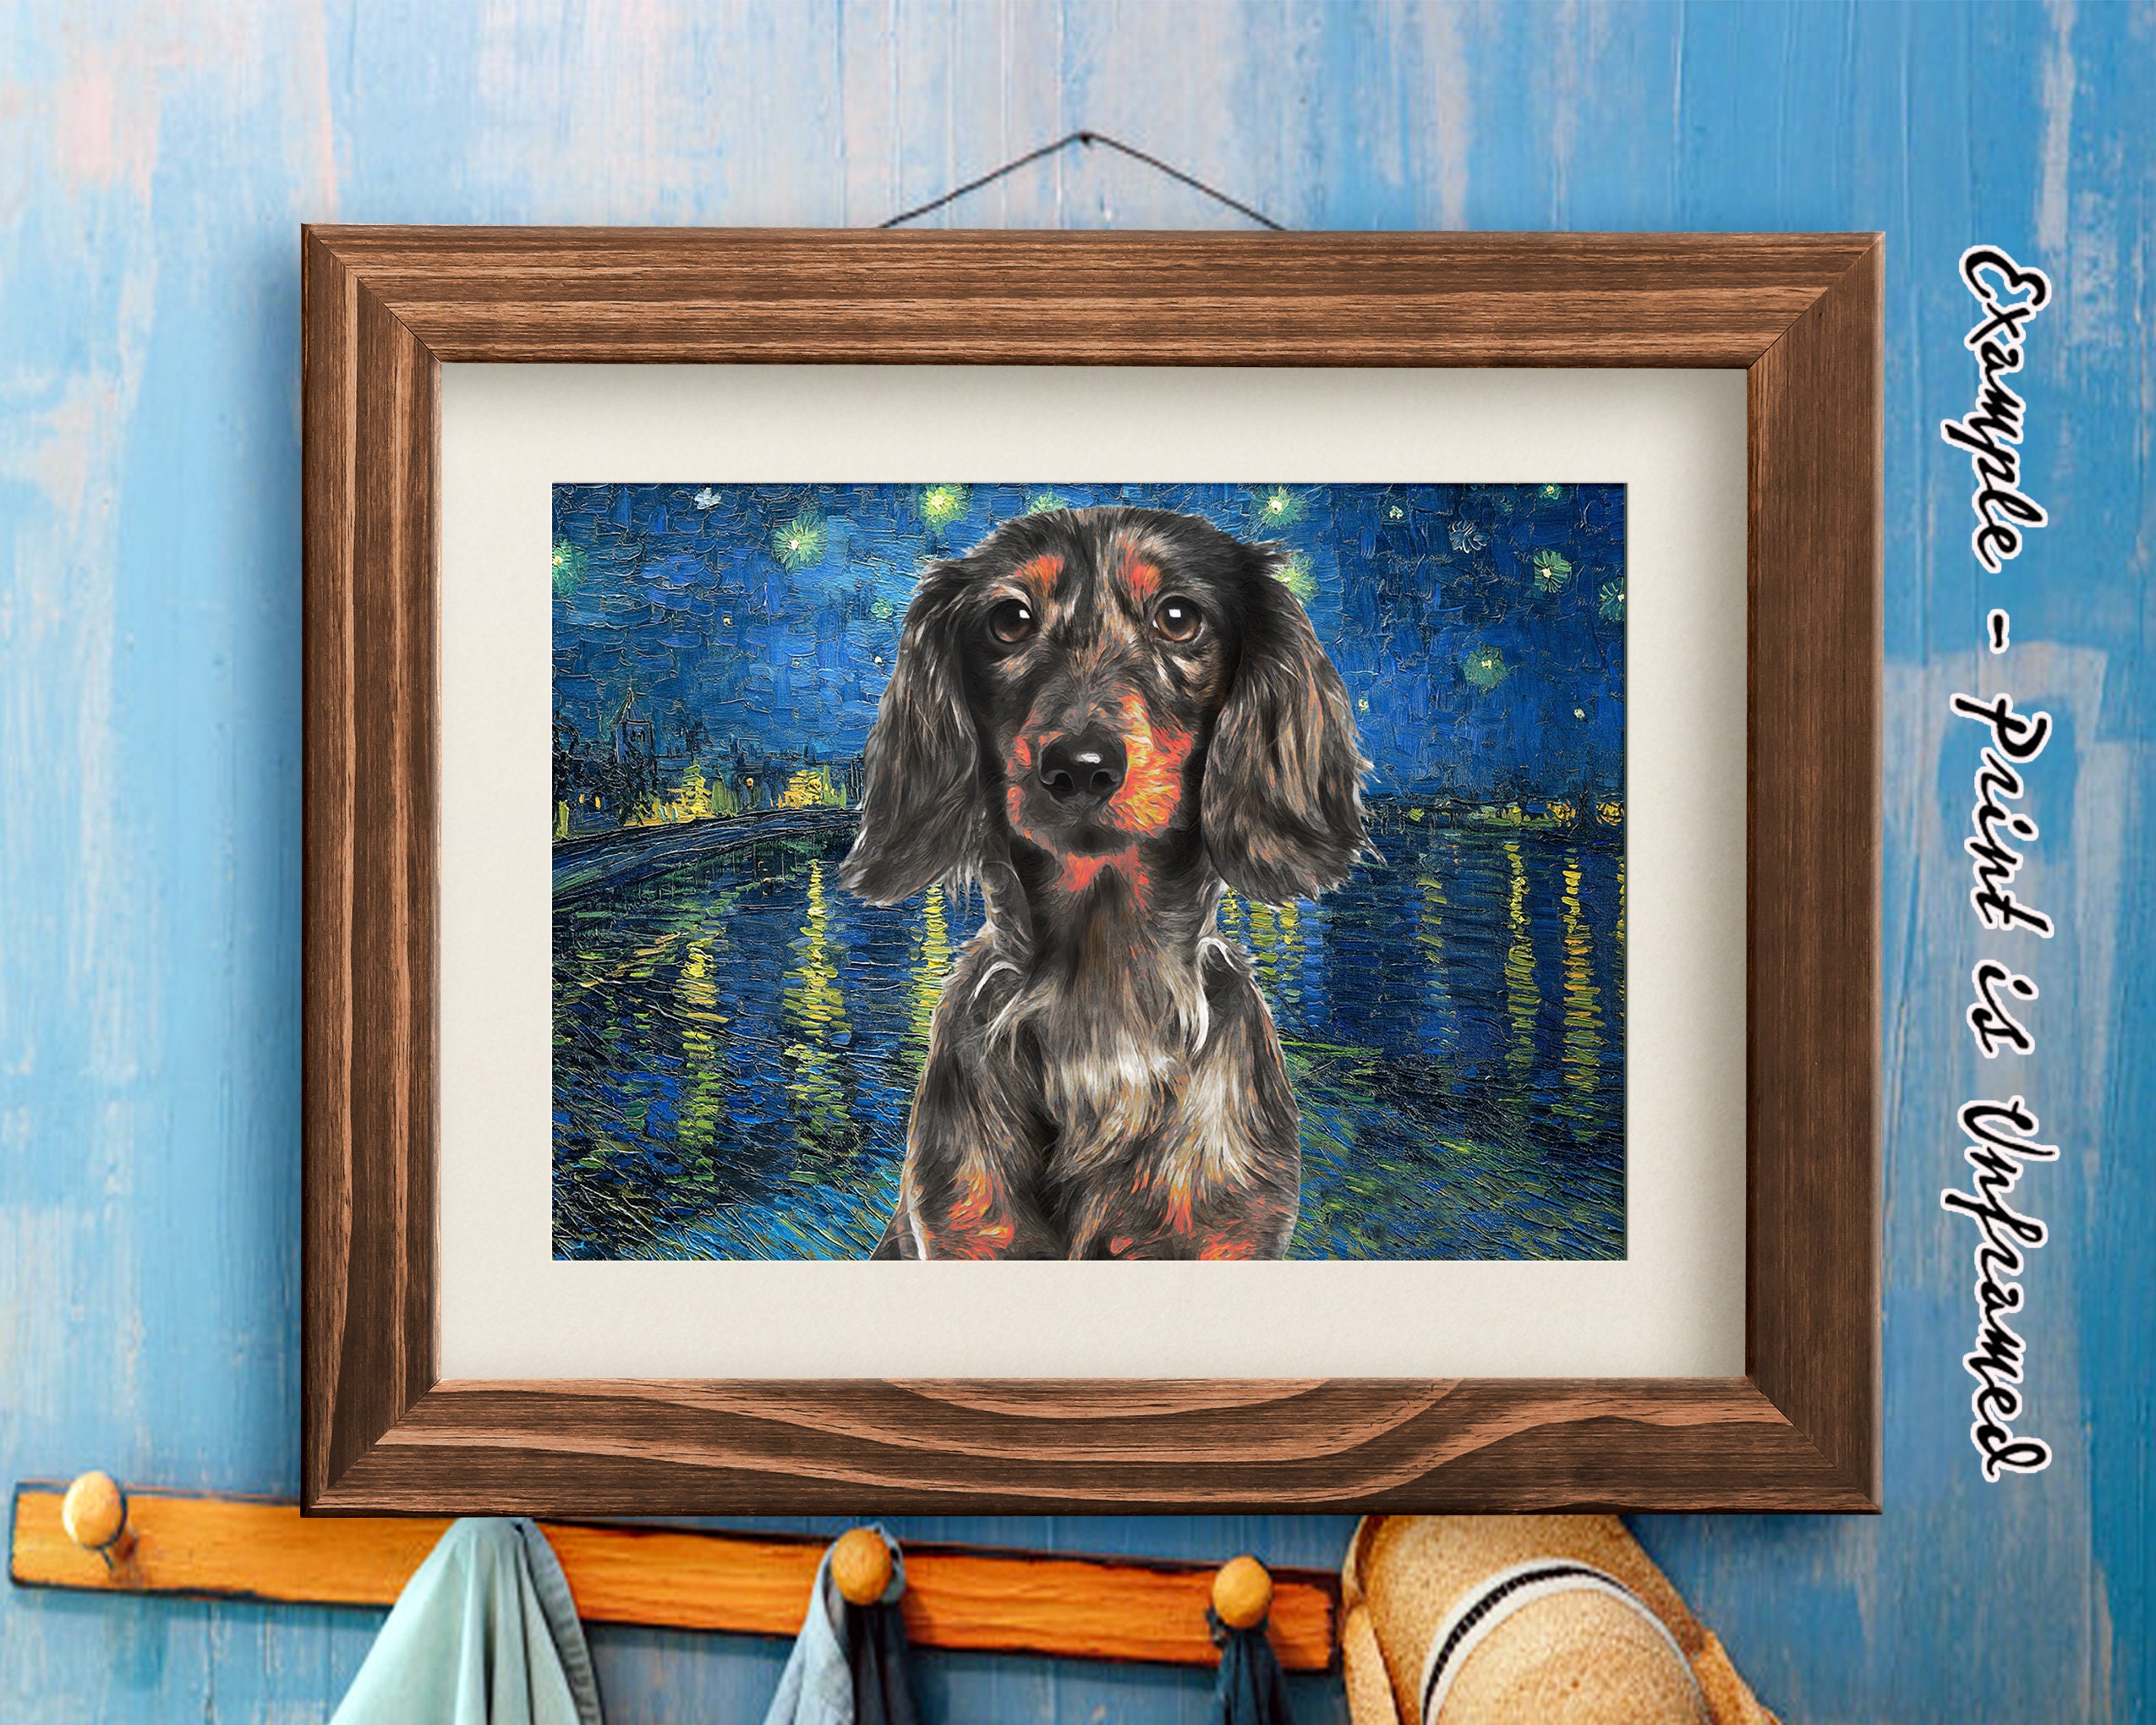 Dapple Long-haired Dachshund Art CANVAS Starry Night Van Gogh Merle Doxie  Wiener Dog Print and Mug Personalized Dog Portrait Mom & Dad Gifts - Etsy